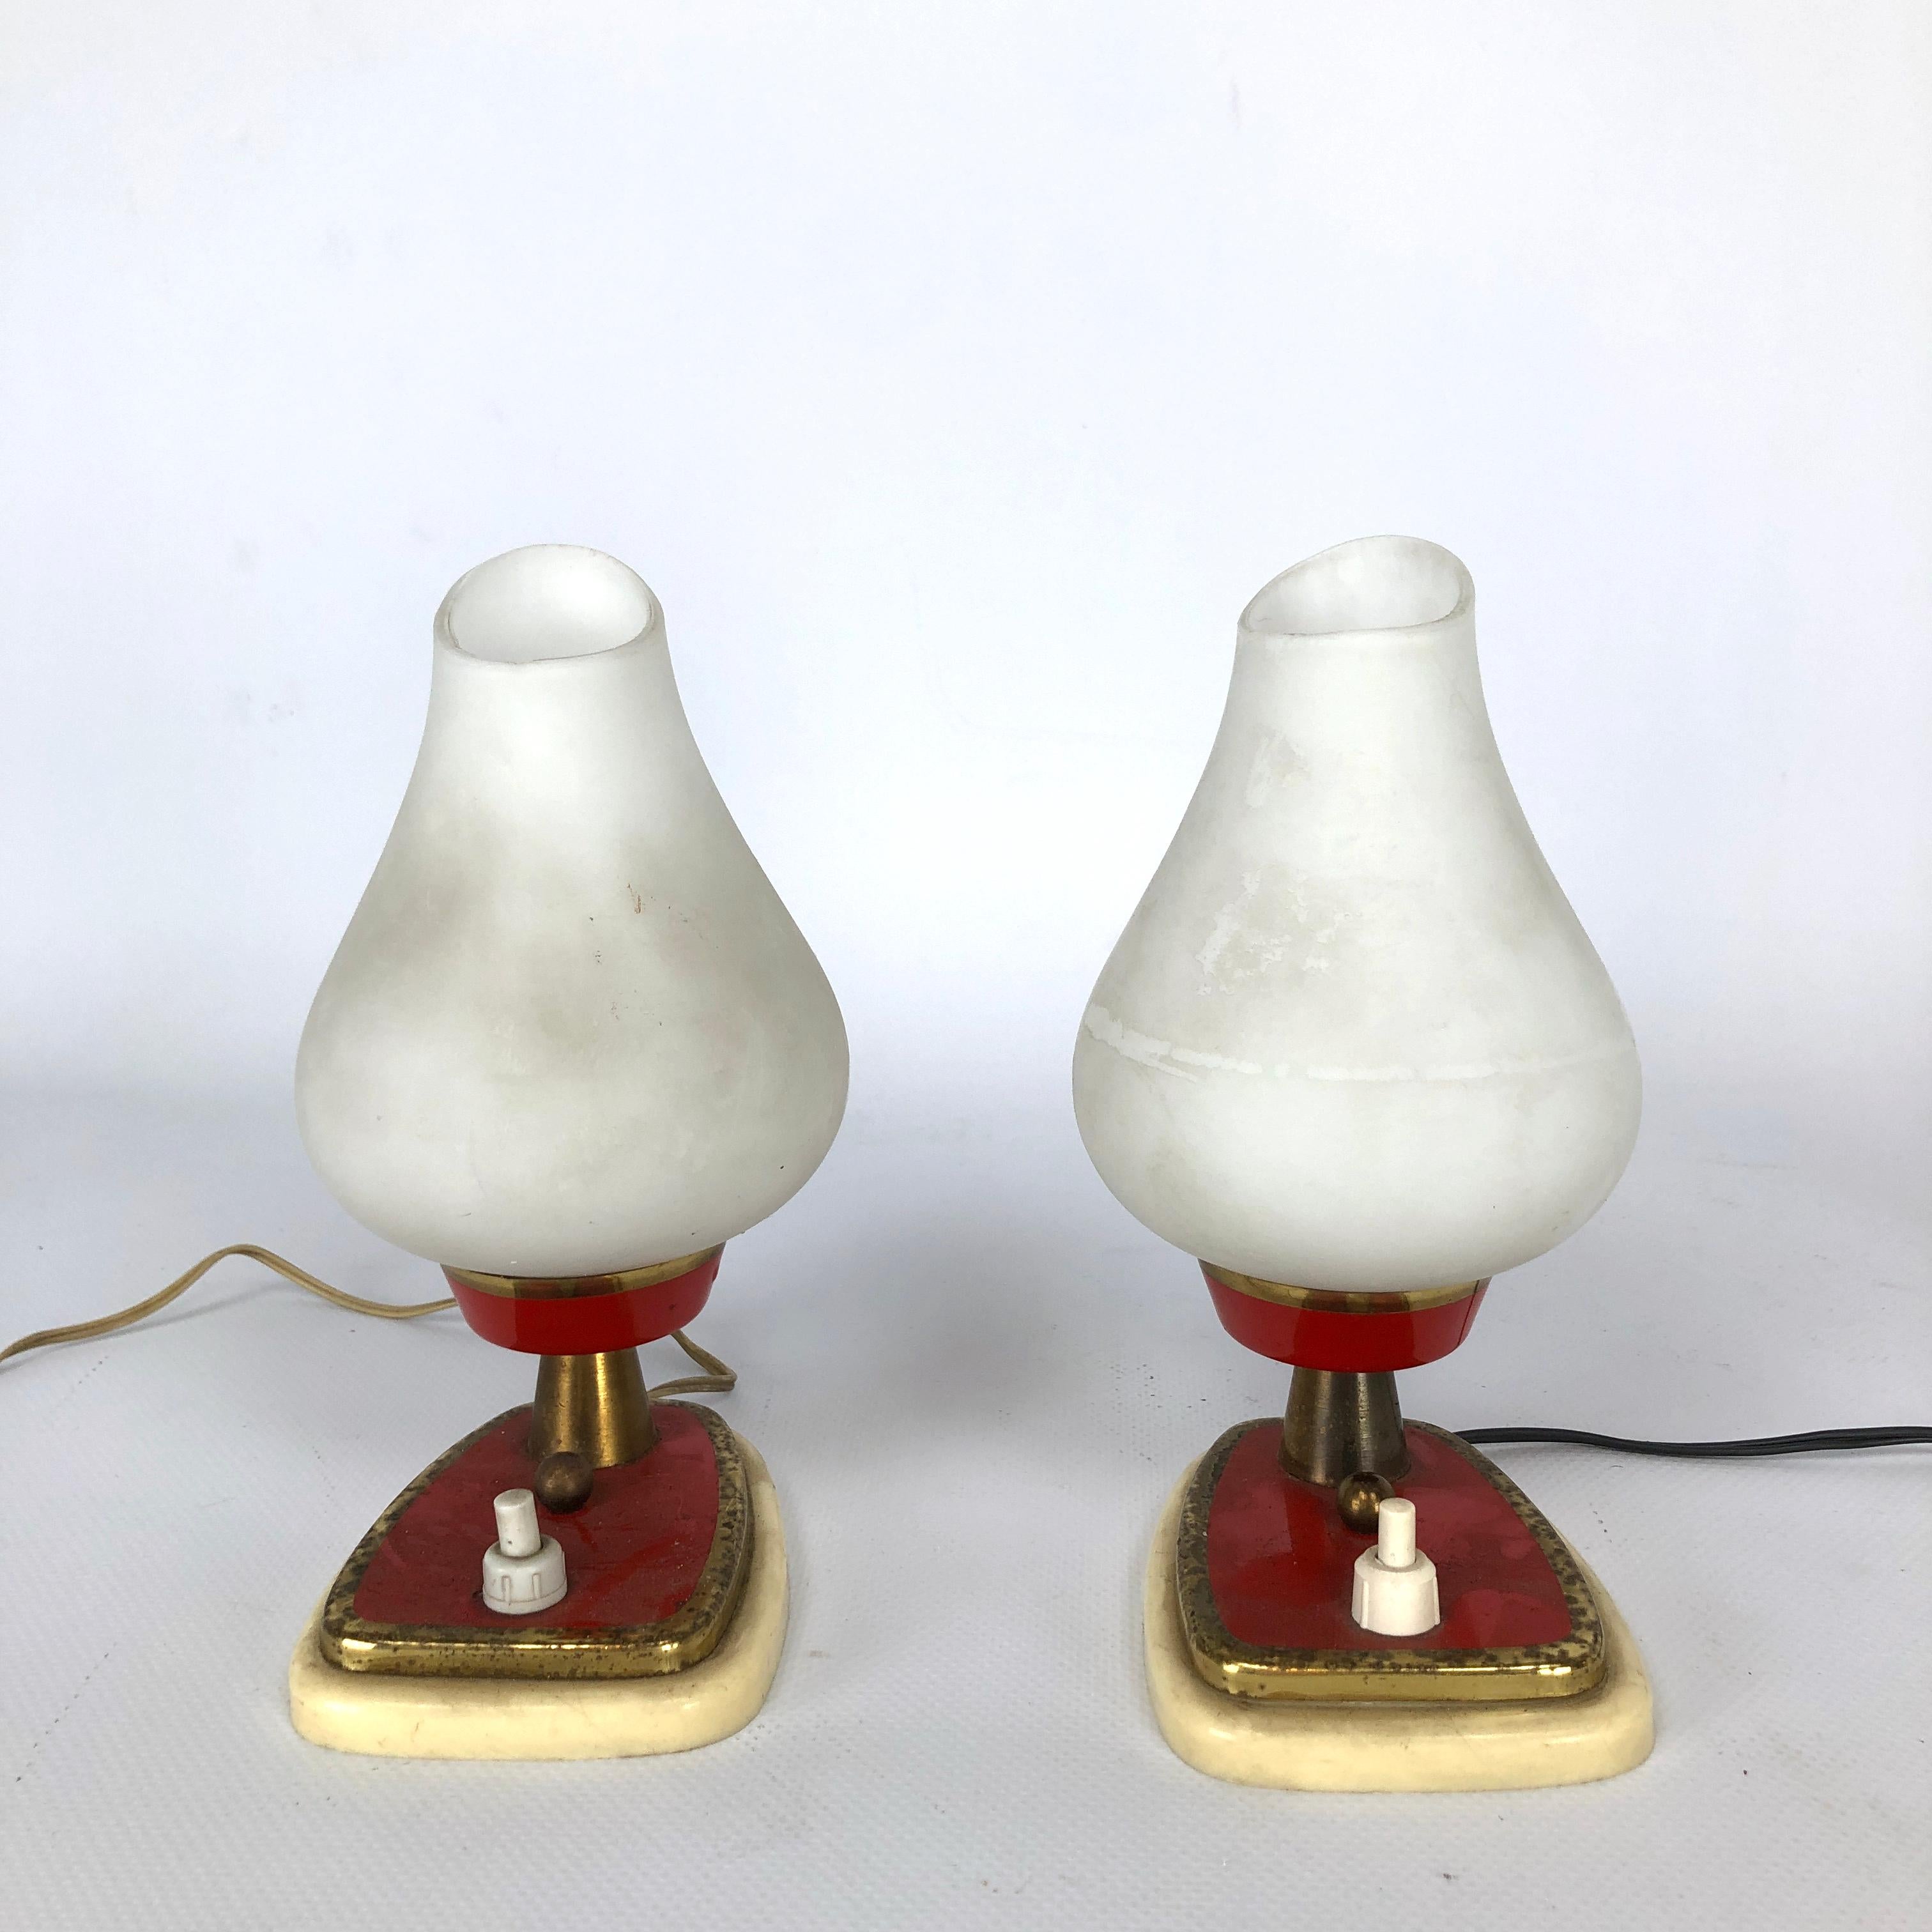 Original vintage condition with evident trace of age and use. They can be used both as table lamp or sconces. Full working with EU standard, adaptable on demand for USA standard.